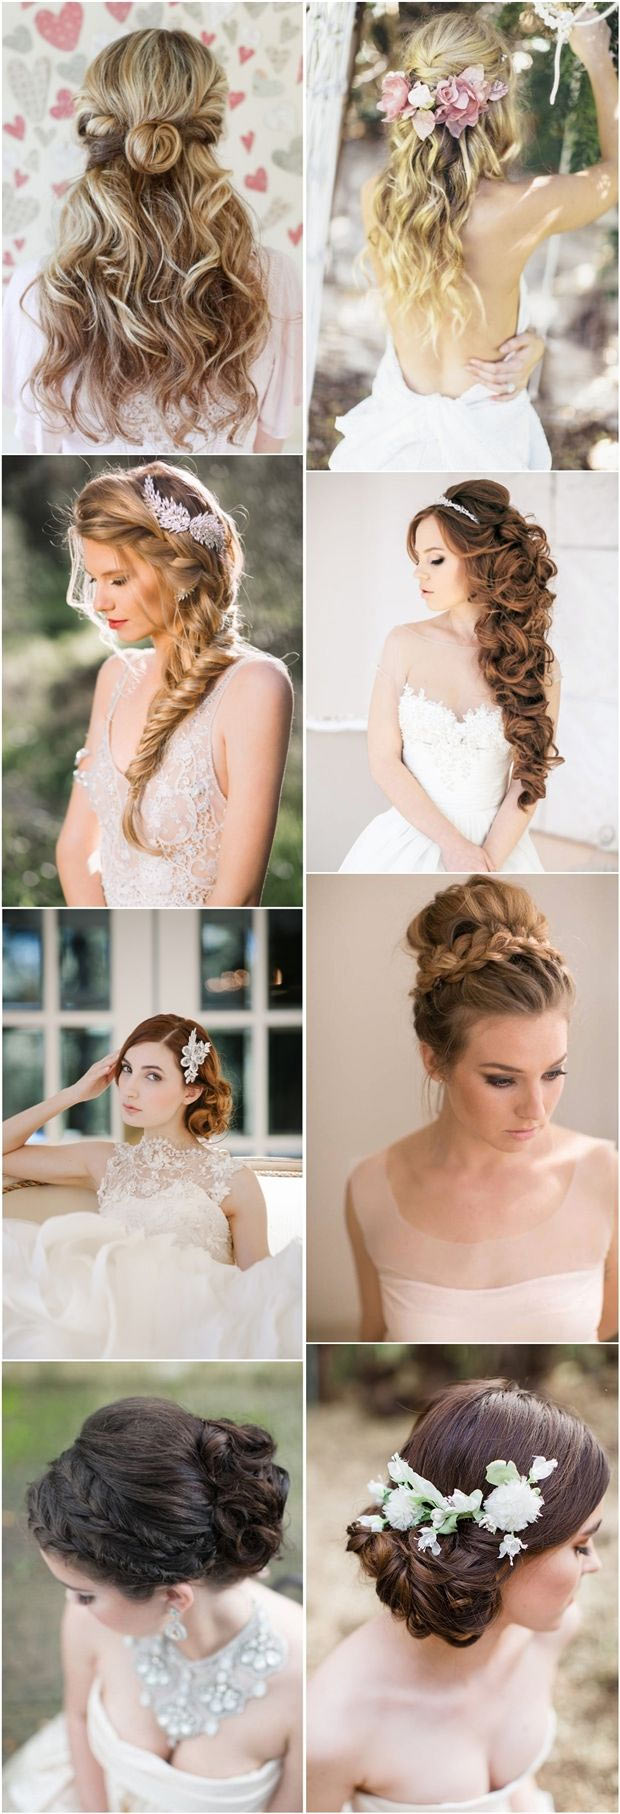 Fabulous Wedding Hairstyles for Every Bride